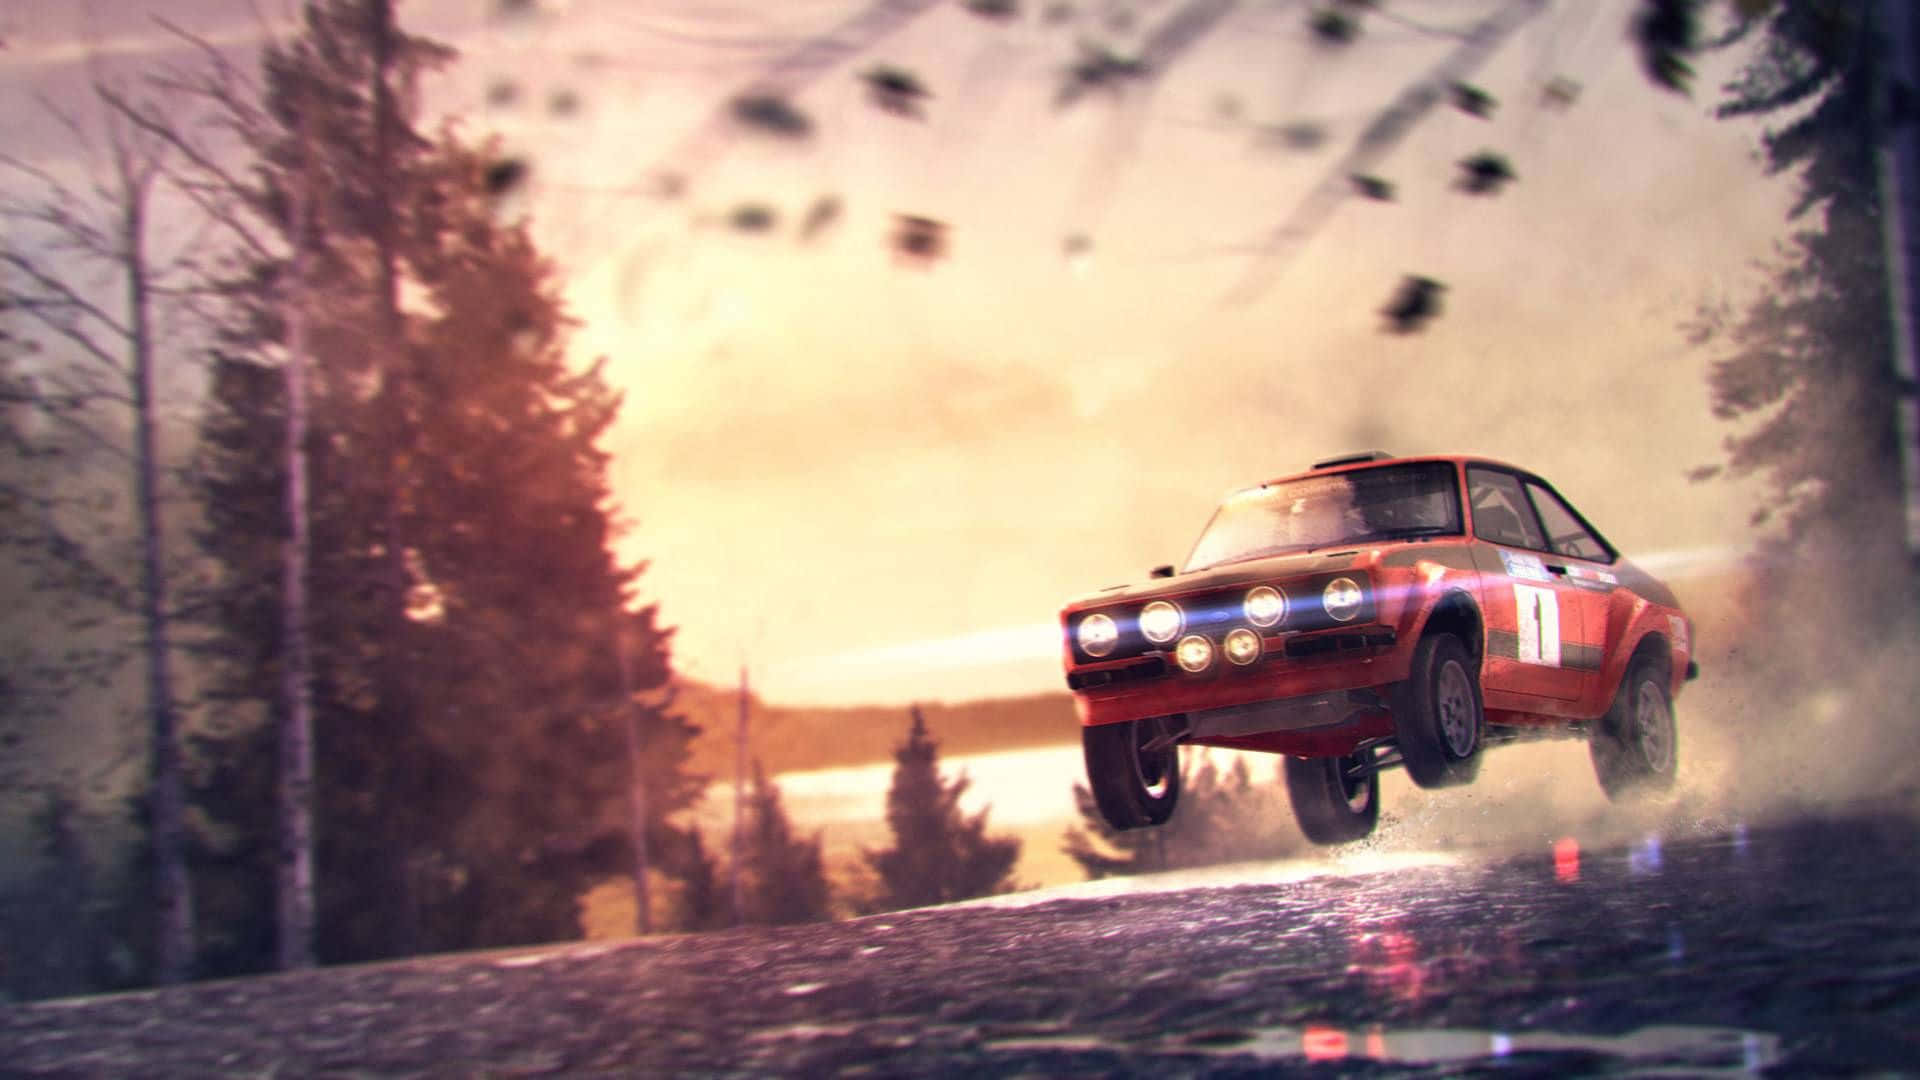 A Red Car Driving Through A Forest